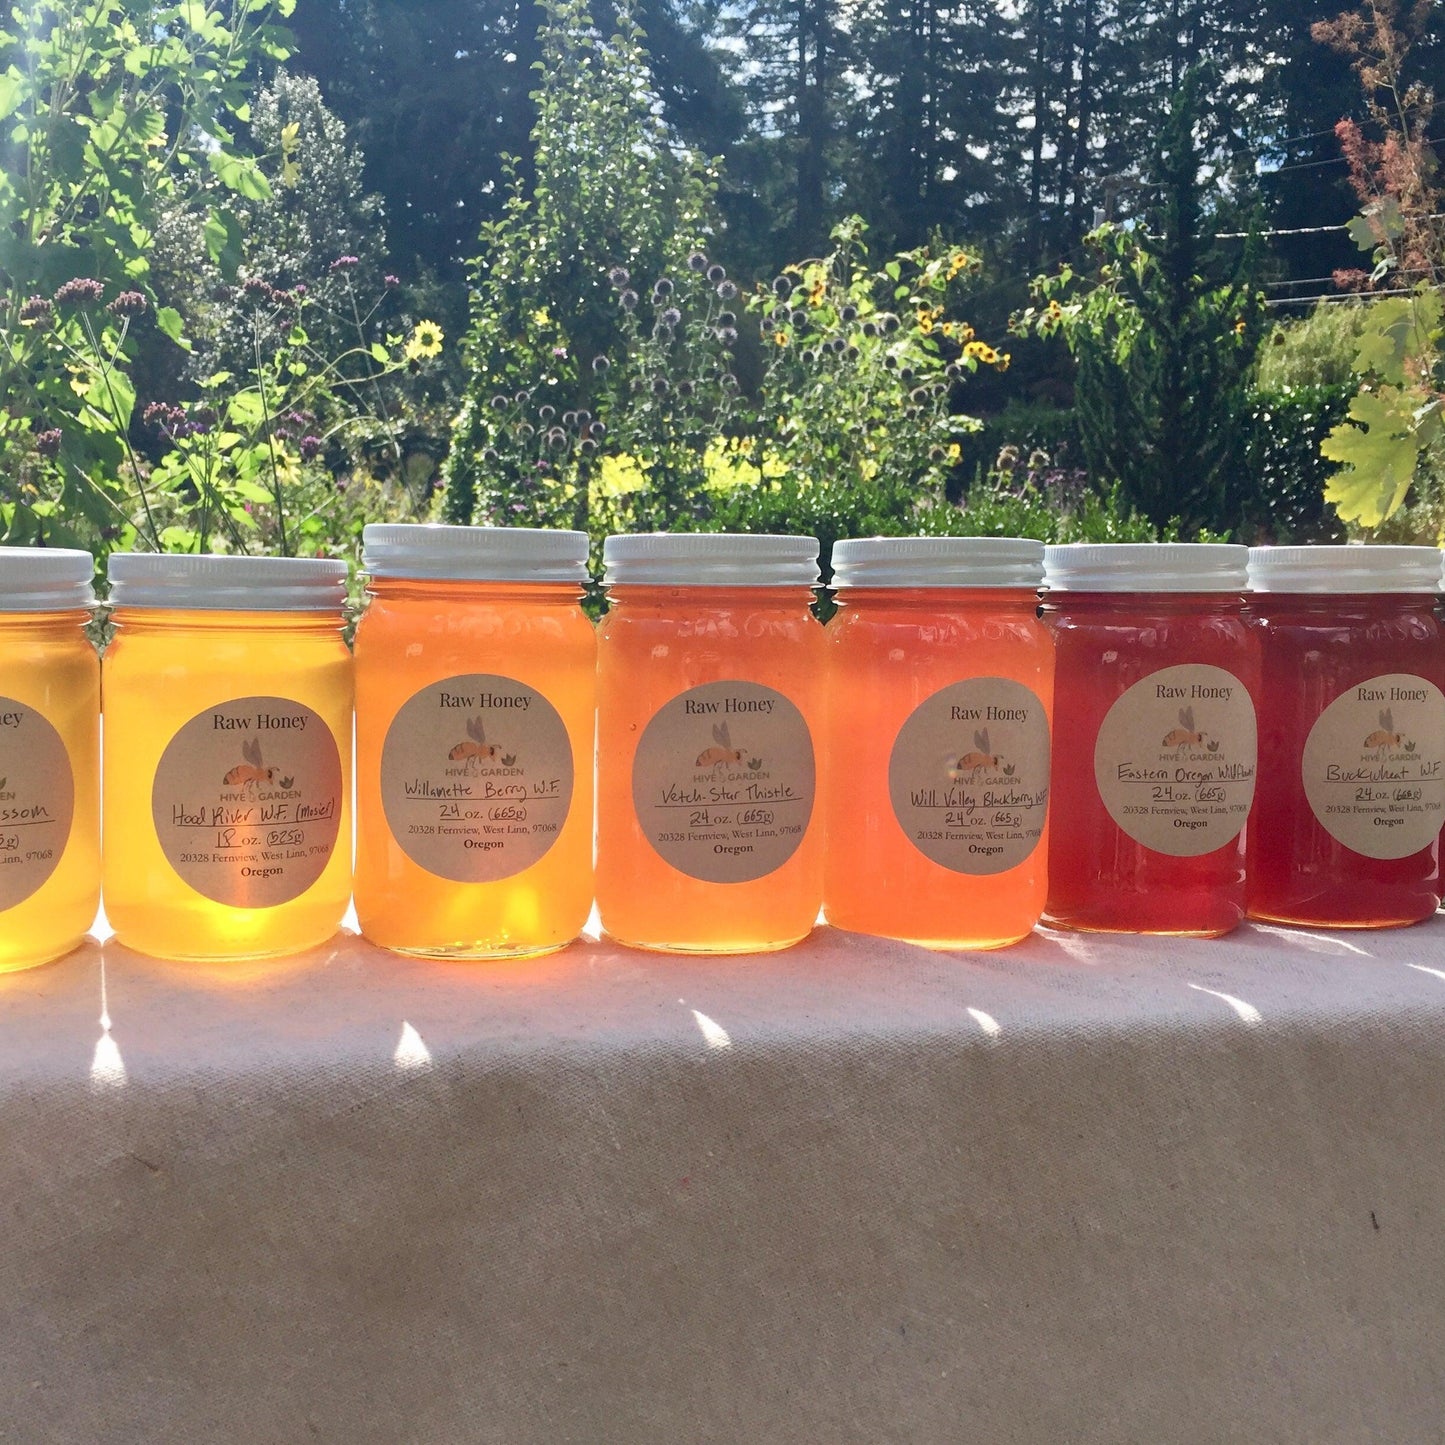 Check out our "Raw Honey" page!